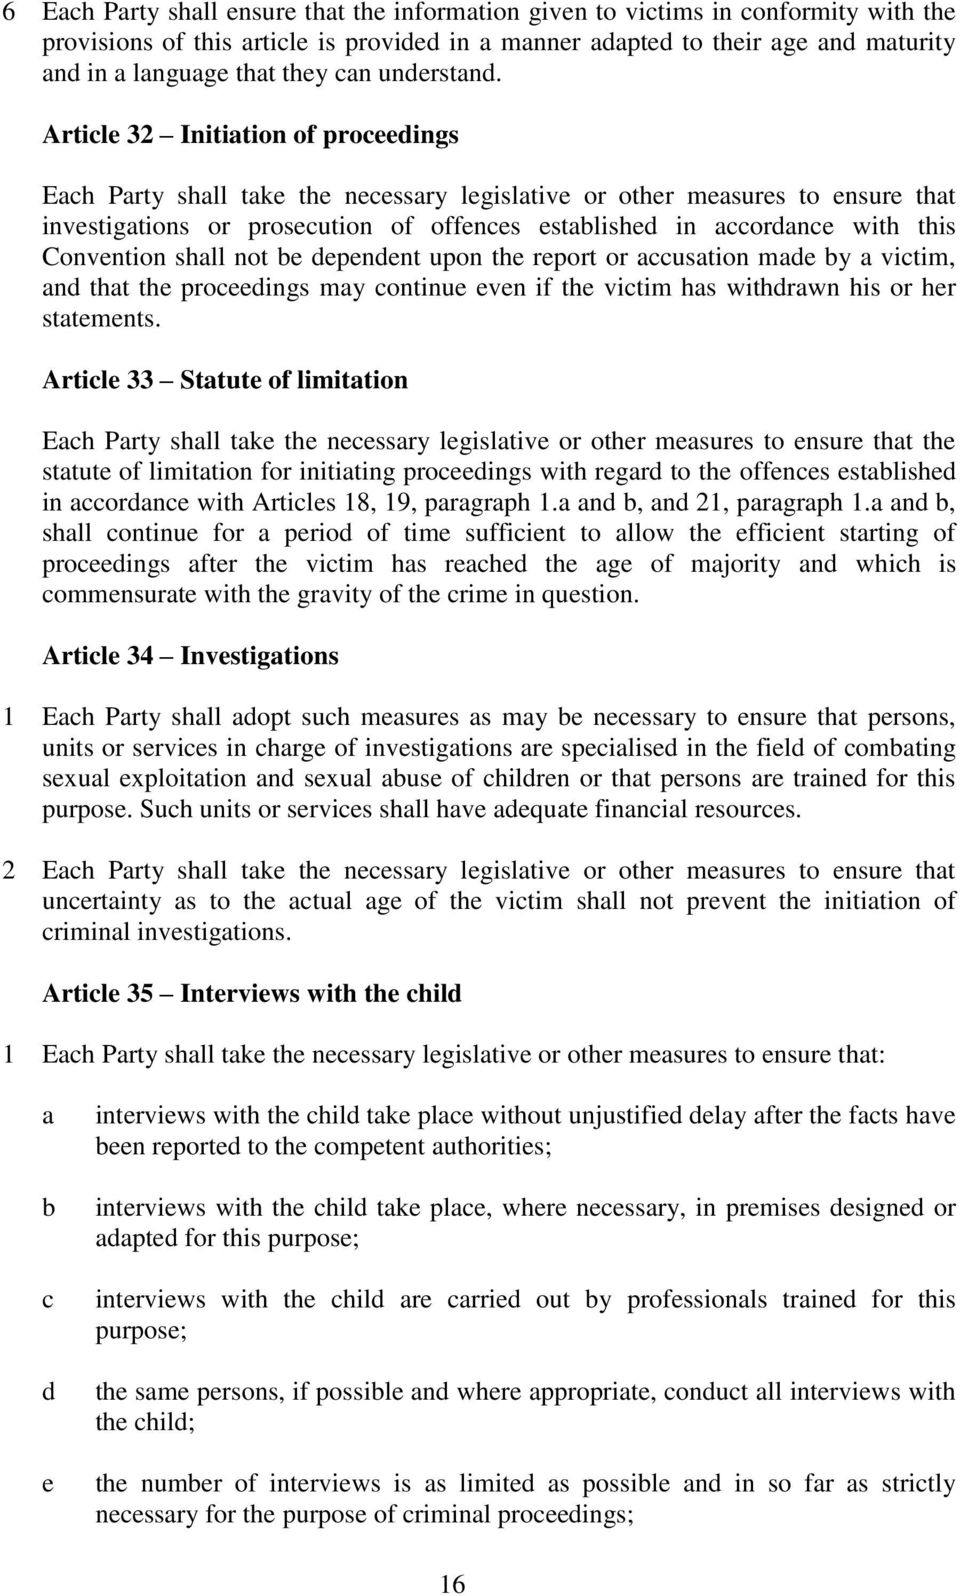 Article 32 Initiation of proceedings Each Party shall take the necessary legislative or other measures to ensure that investigations or prosecution of offences established in accordance with this